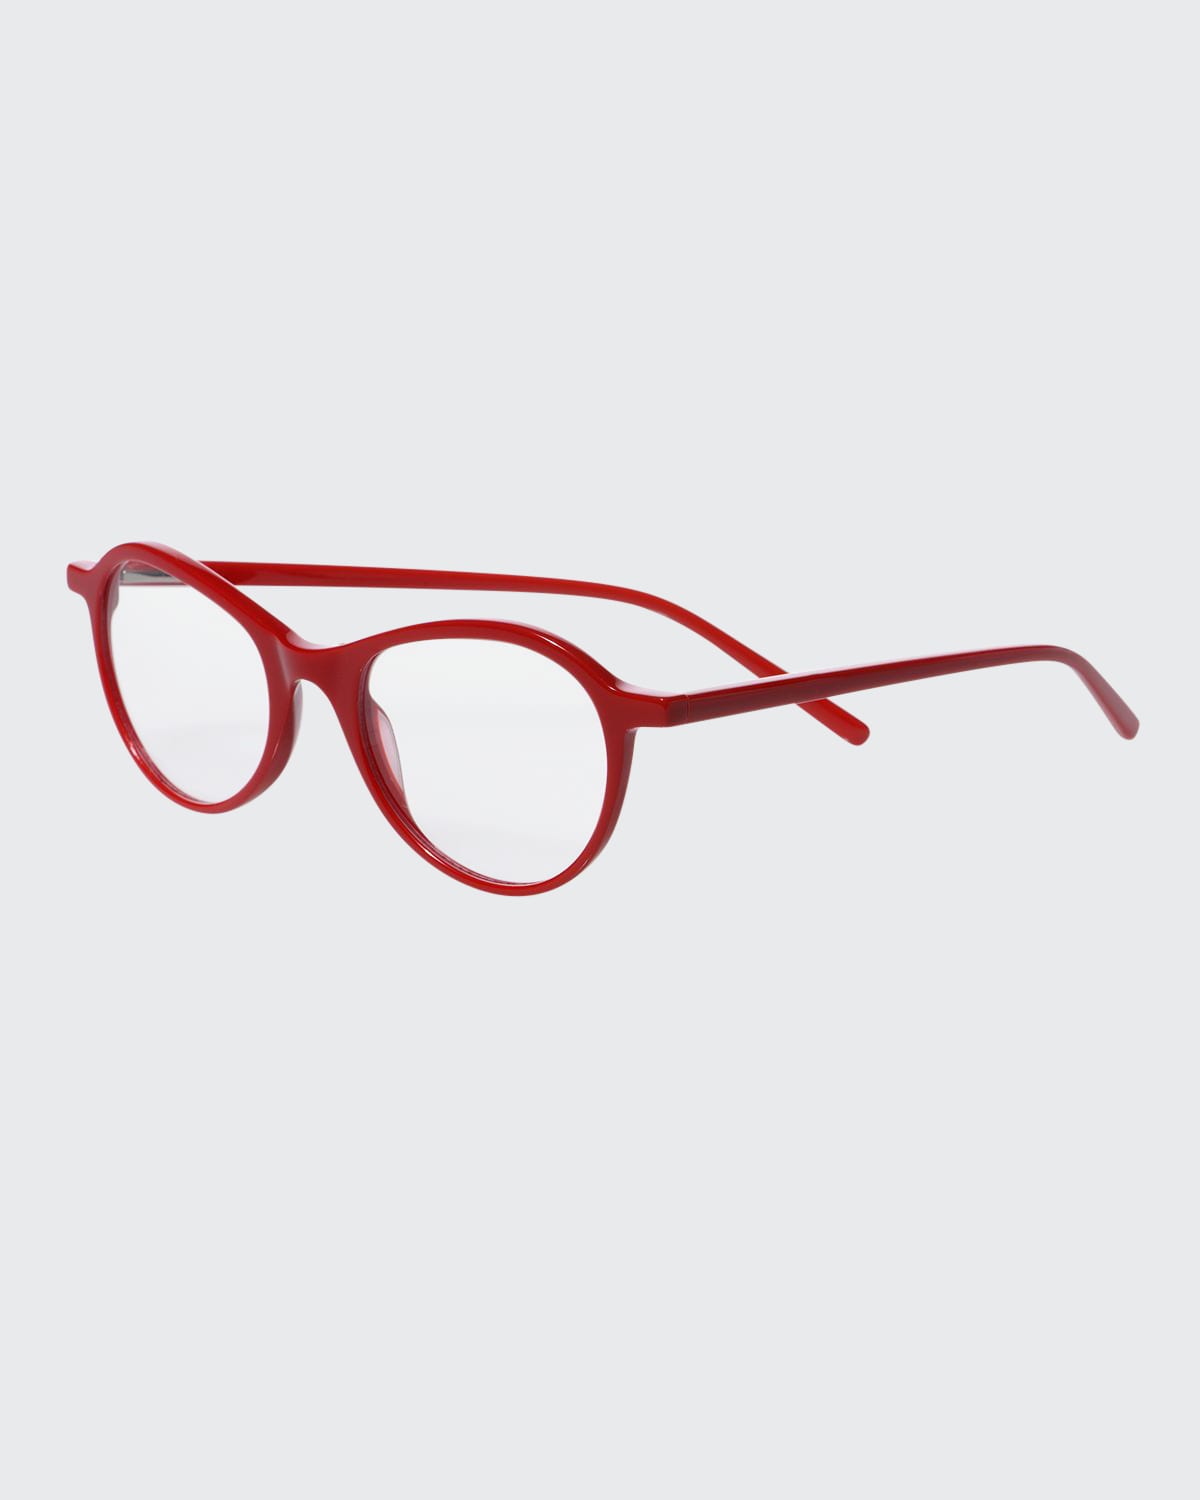 Barbee Q Butterfly Acetate Reading Glasses